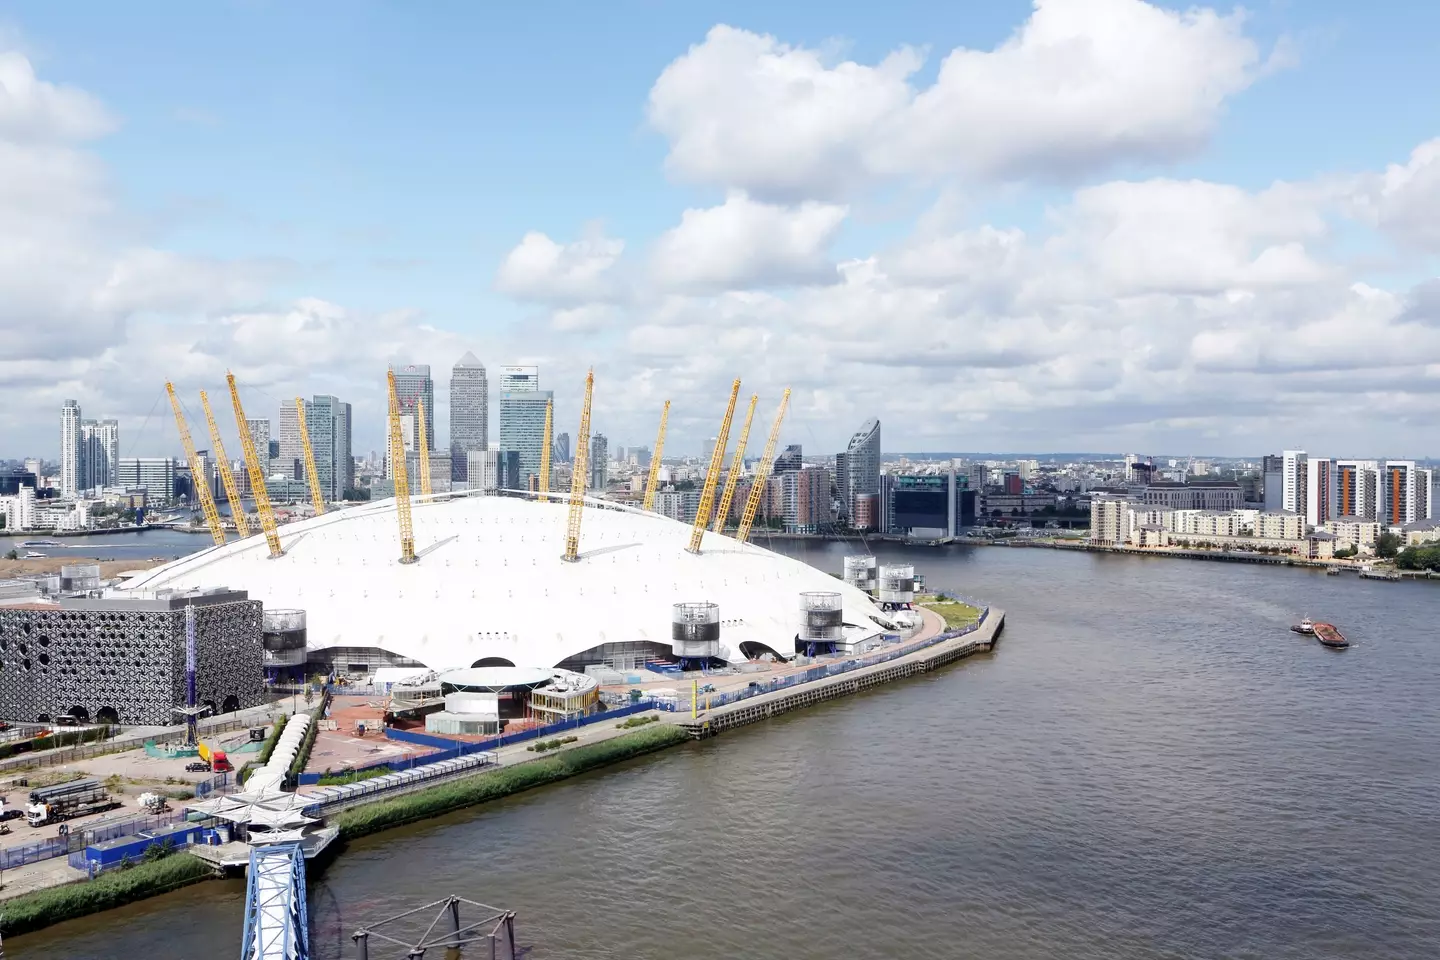 The modern day O2 Arena in London. (Getty Stock Image)